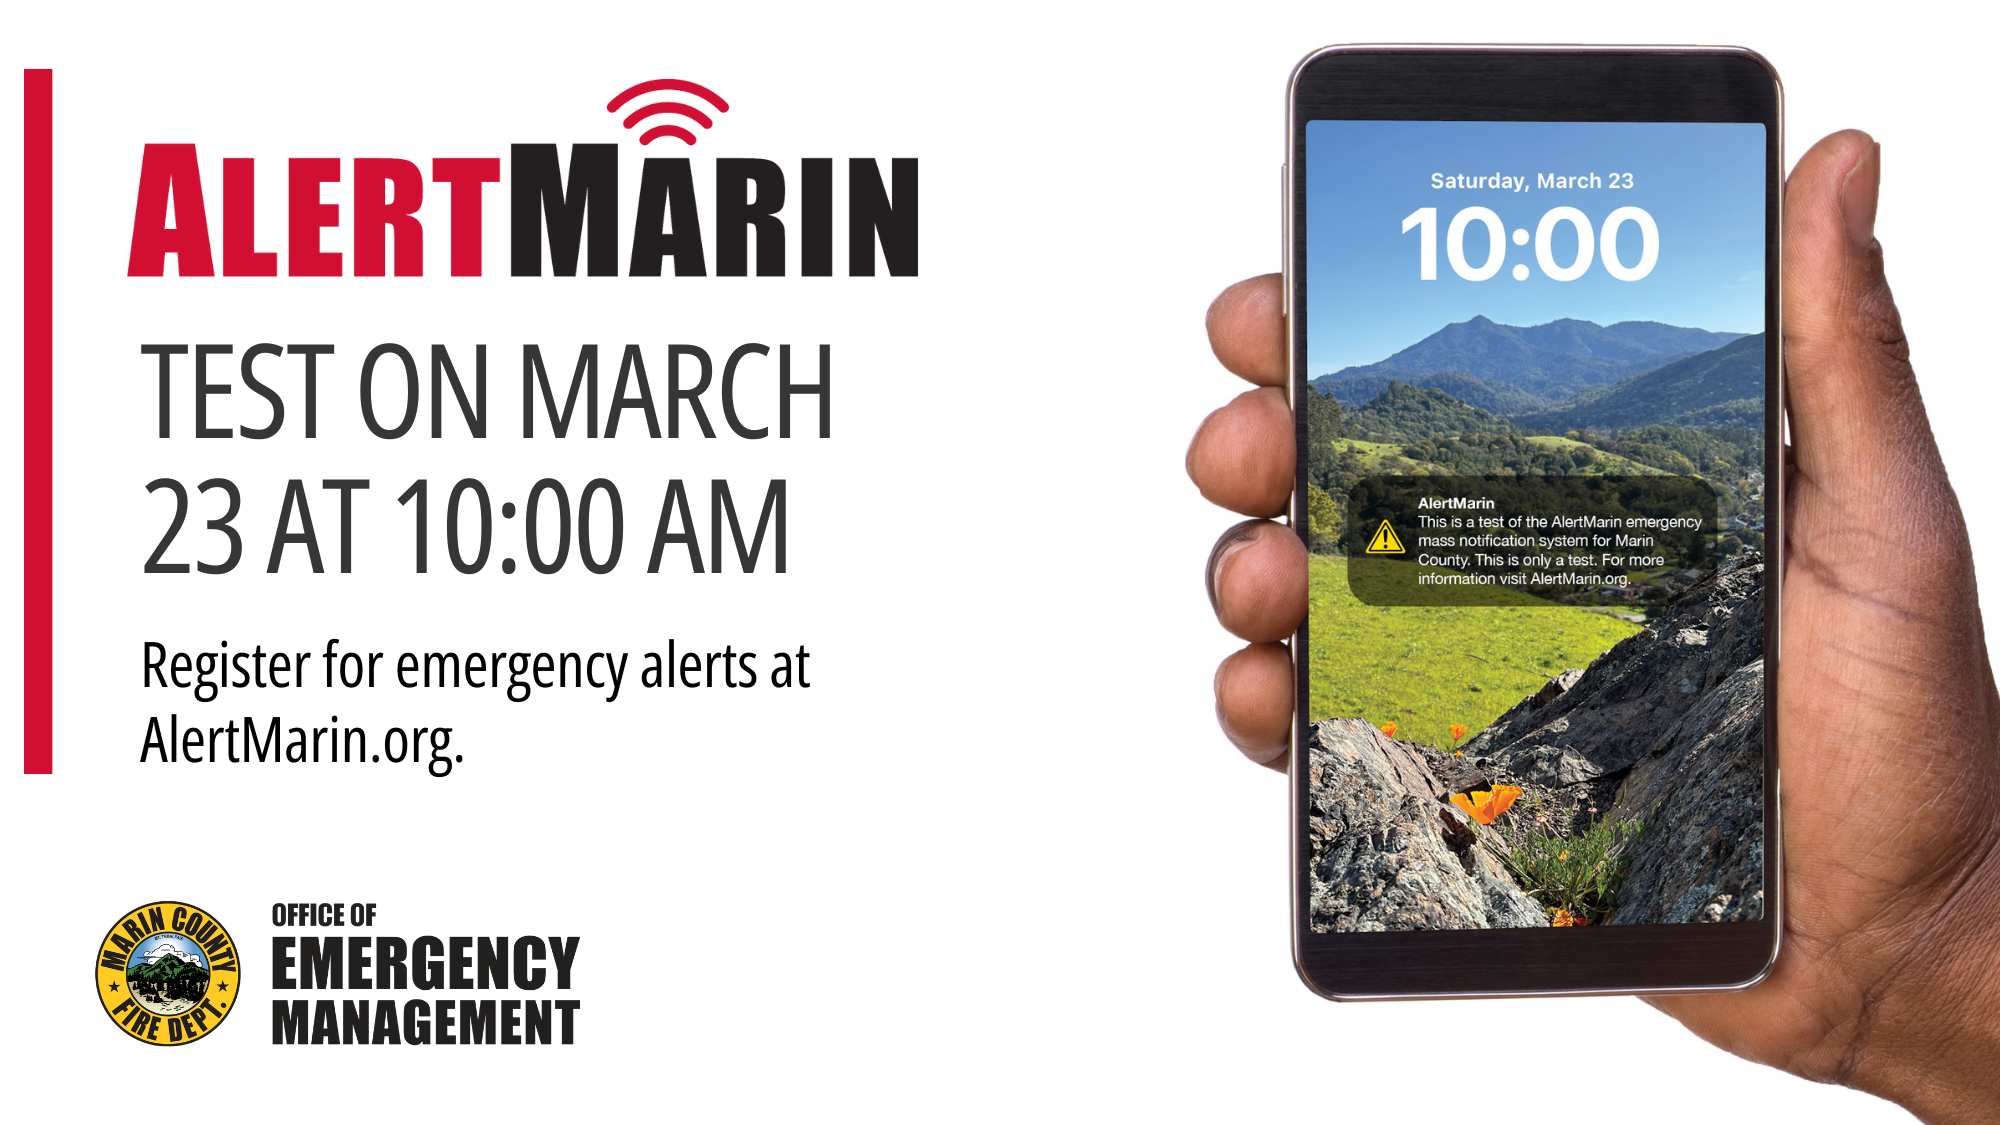 A closeup view of a person's hand holding a cell phone with an emergency notification from AlertMarin.